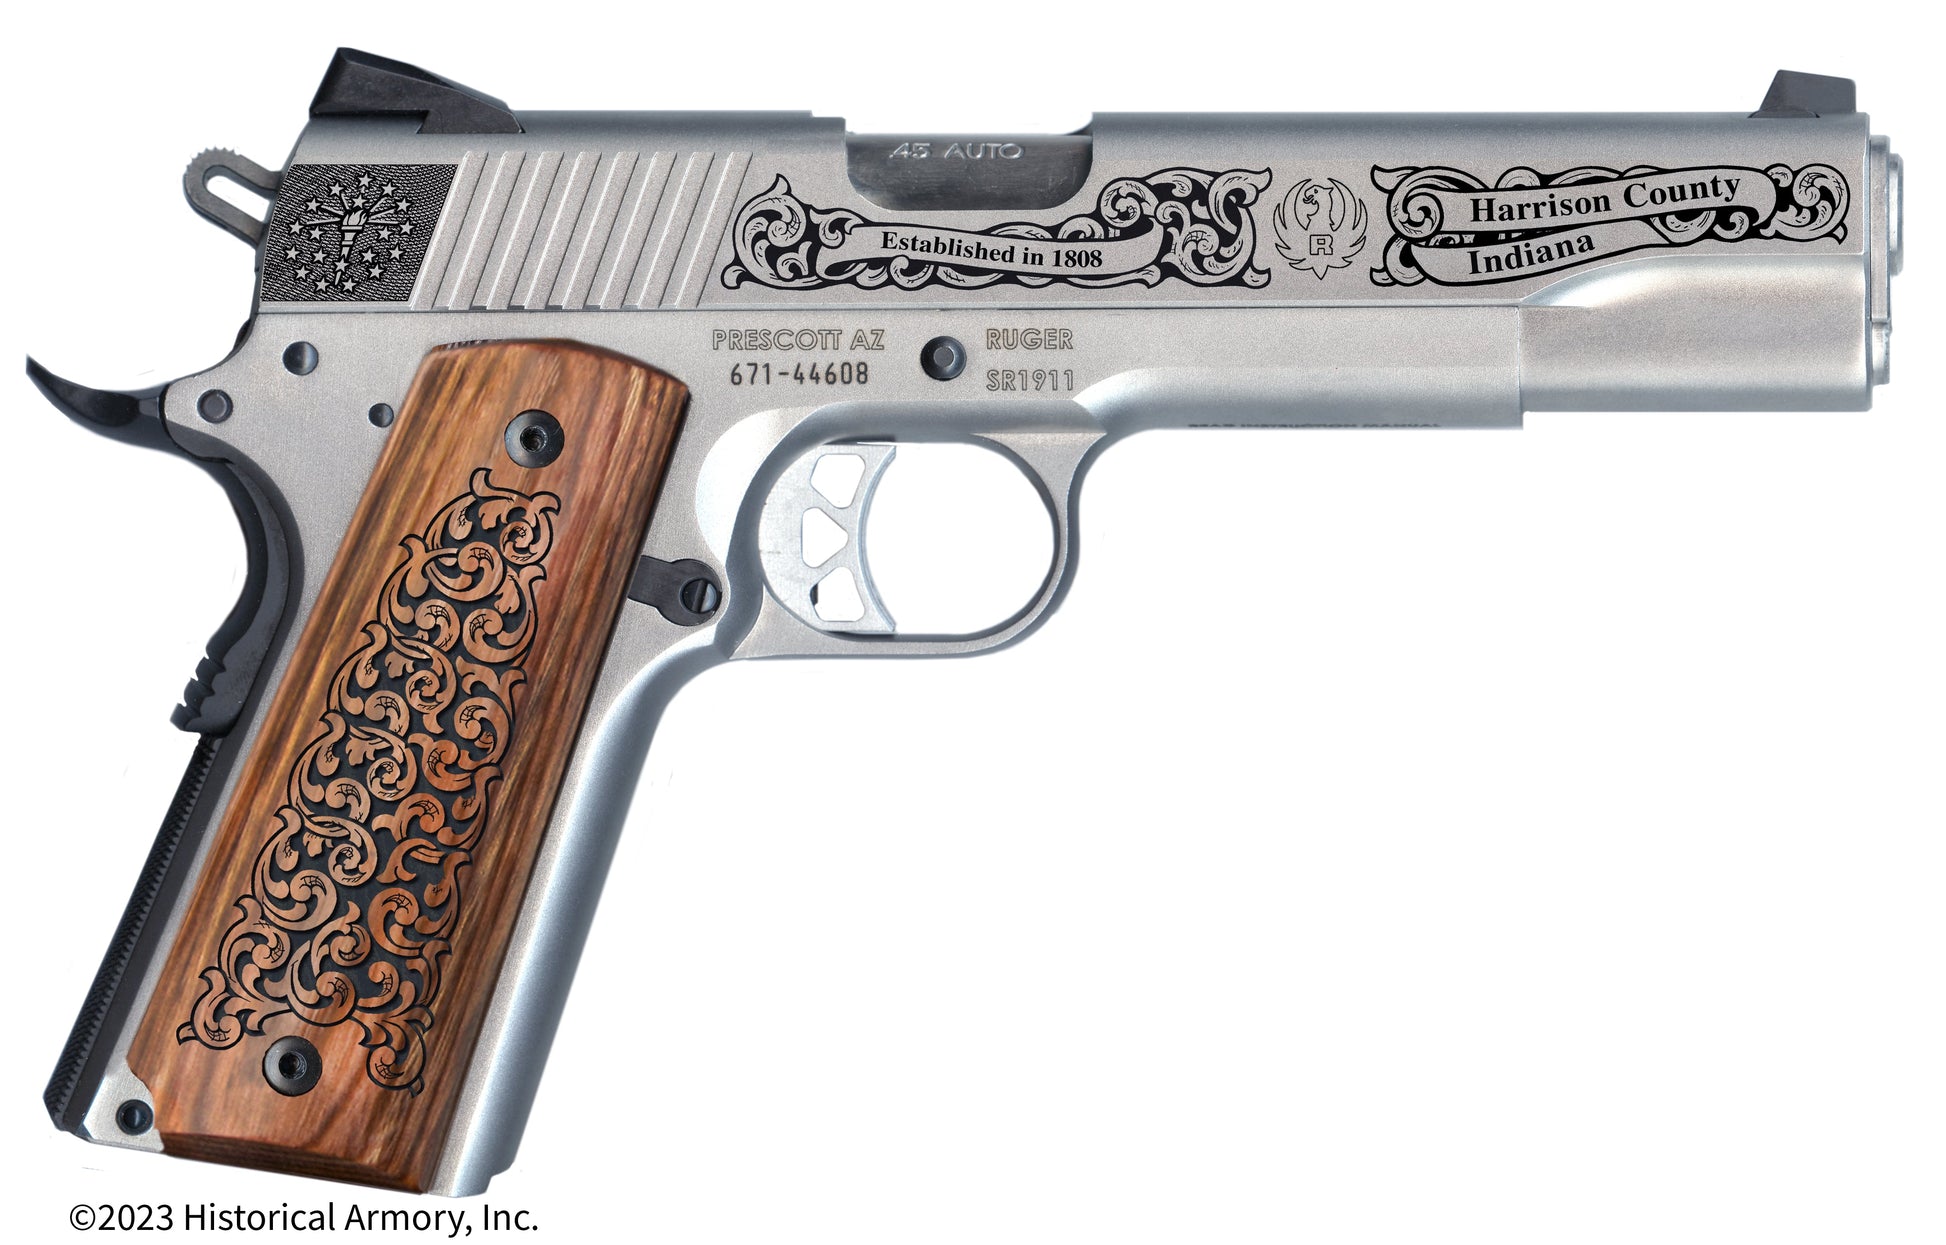 Harrison County Indiana Engraved .45 Auto Ruger 1911